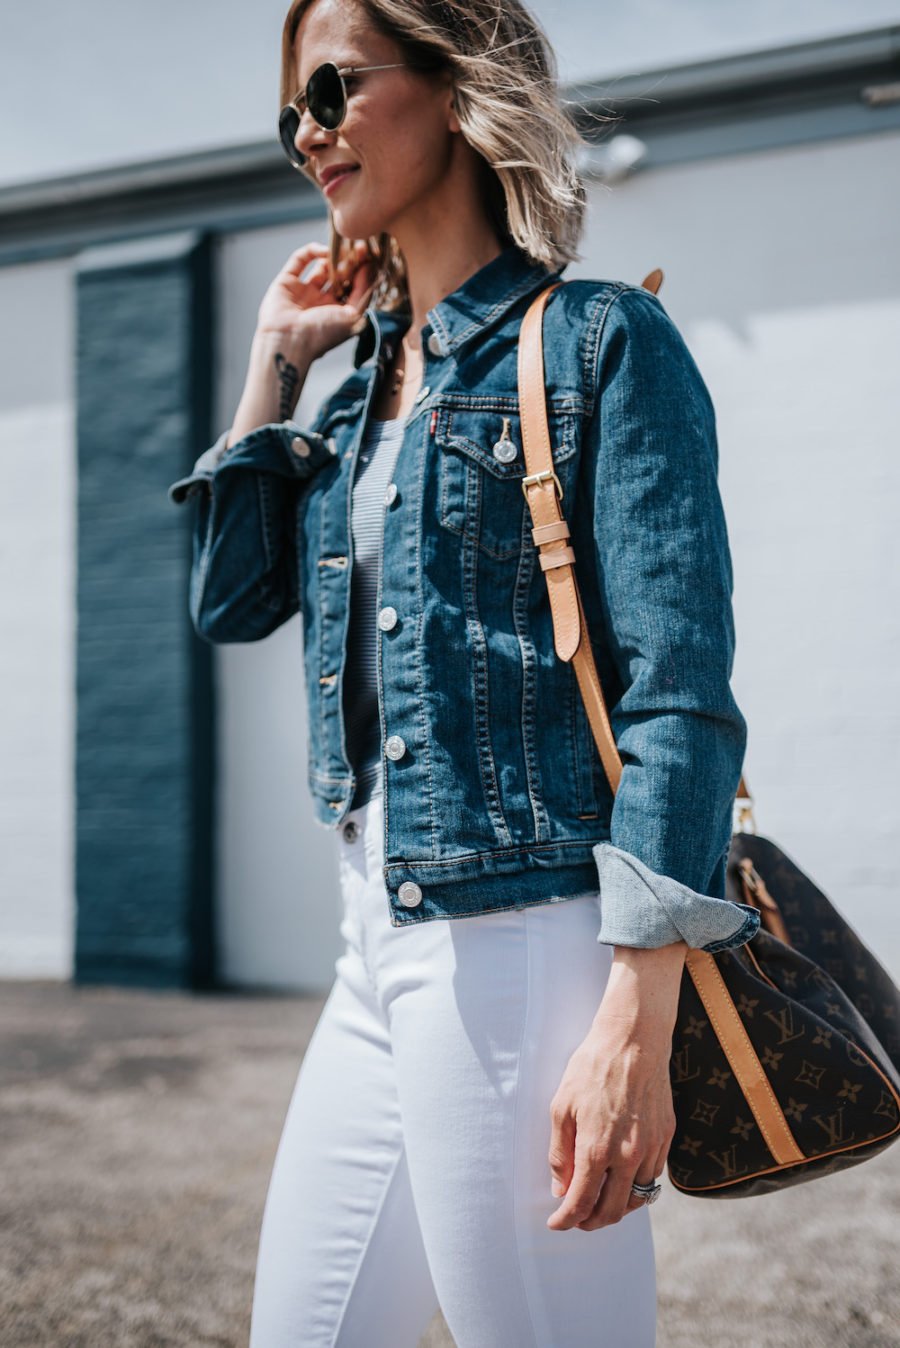 Suzanne wearing white denim jeans, a denim jacket, and carrying a Louis Vuitton bag